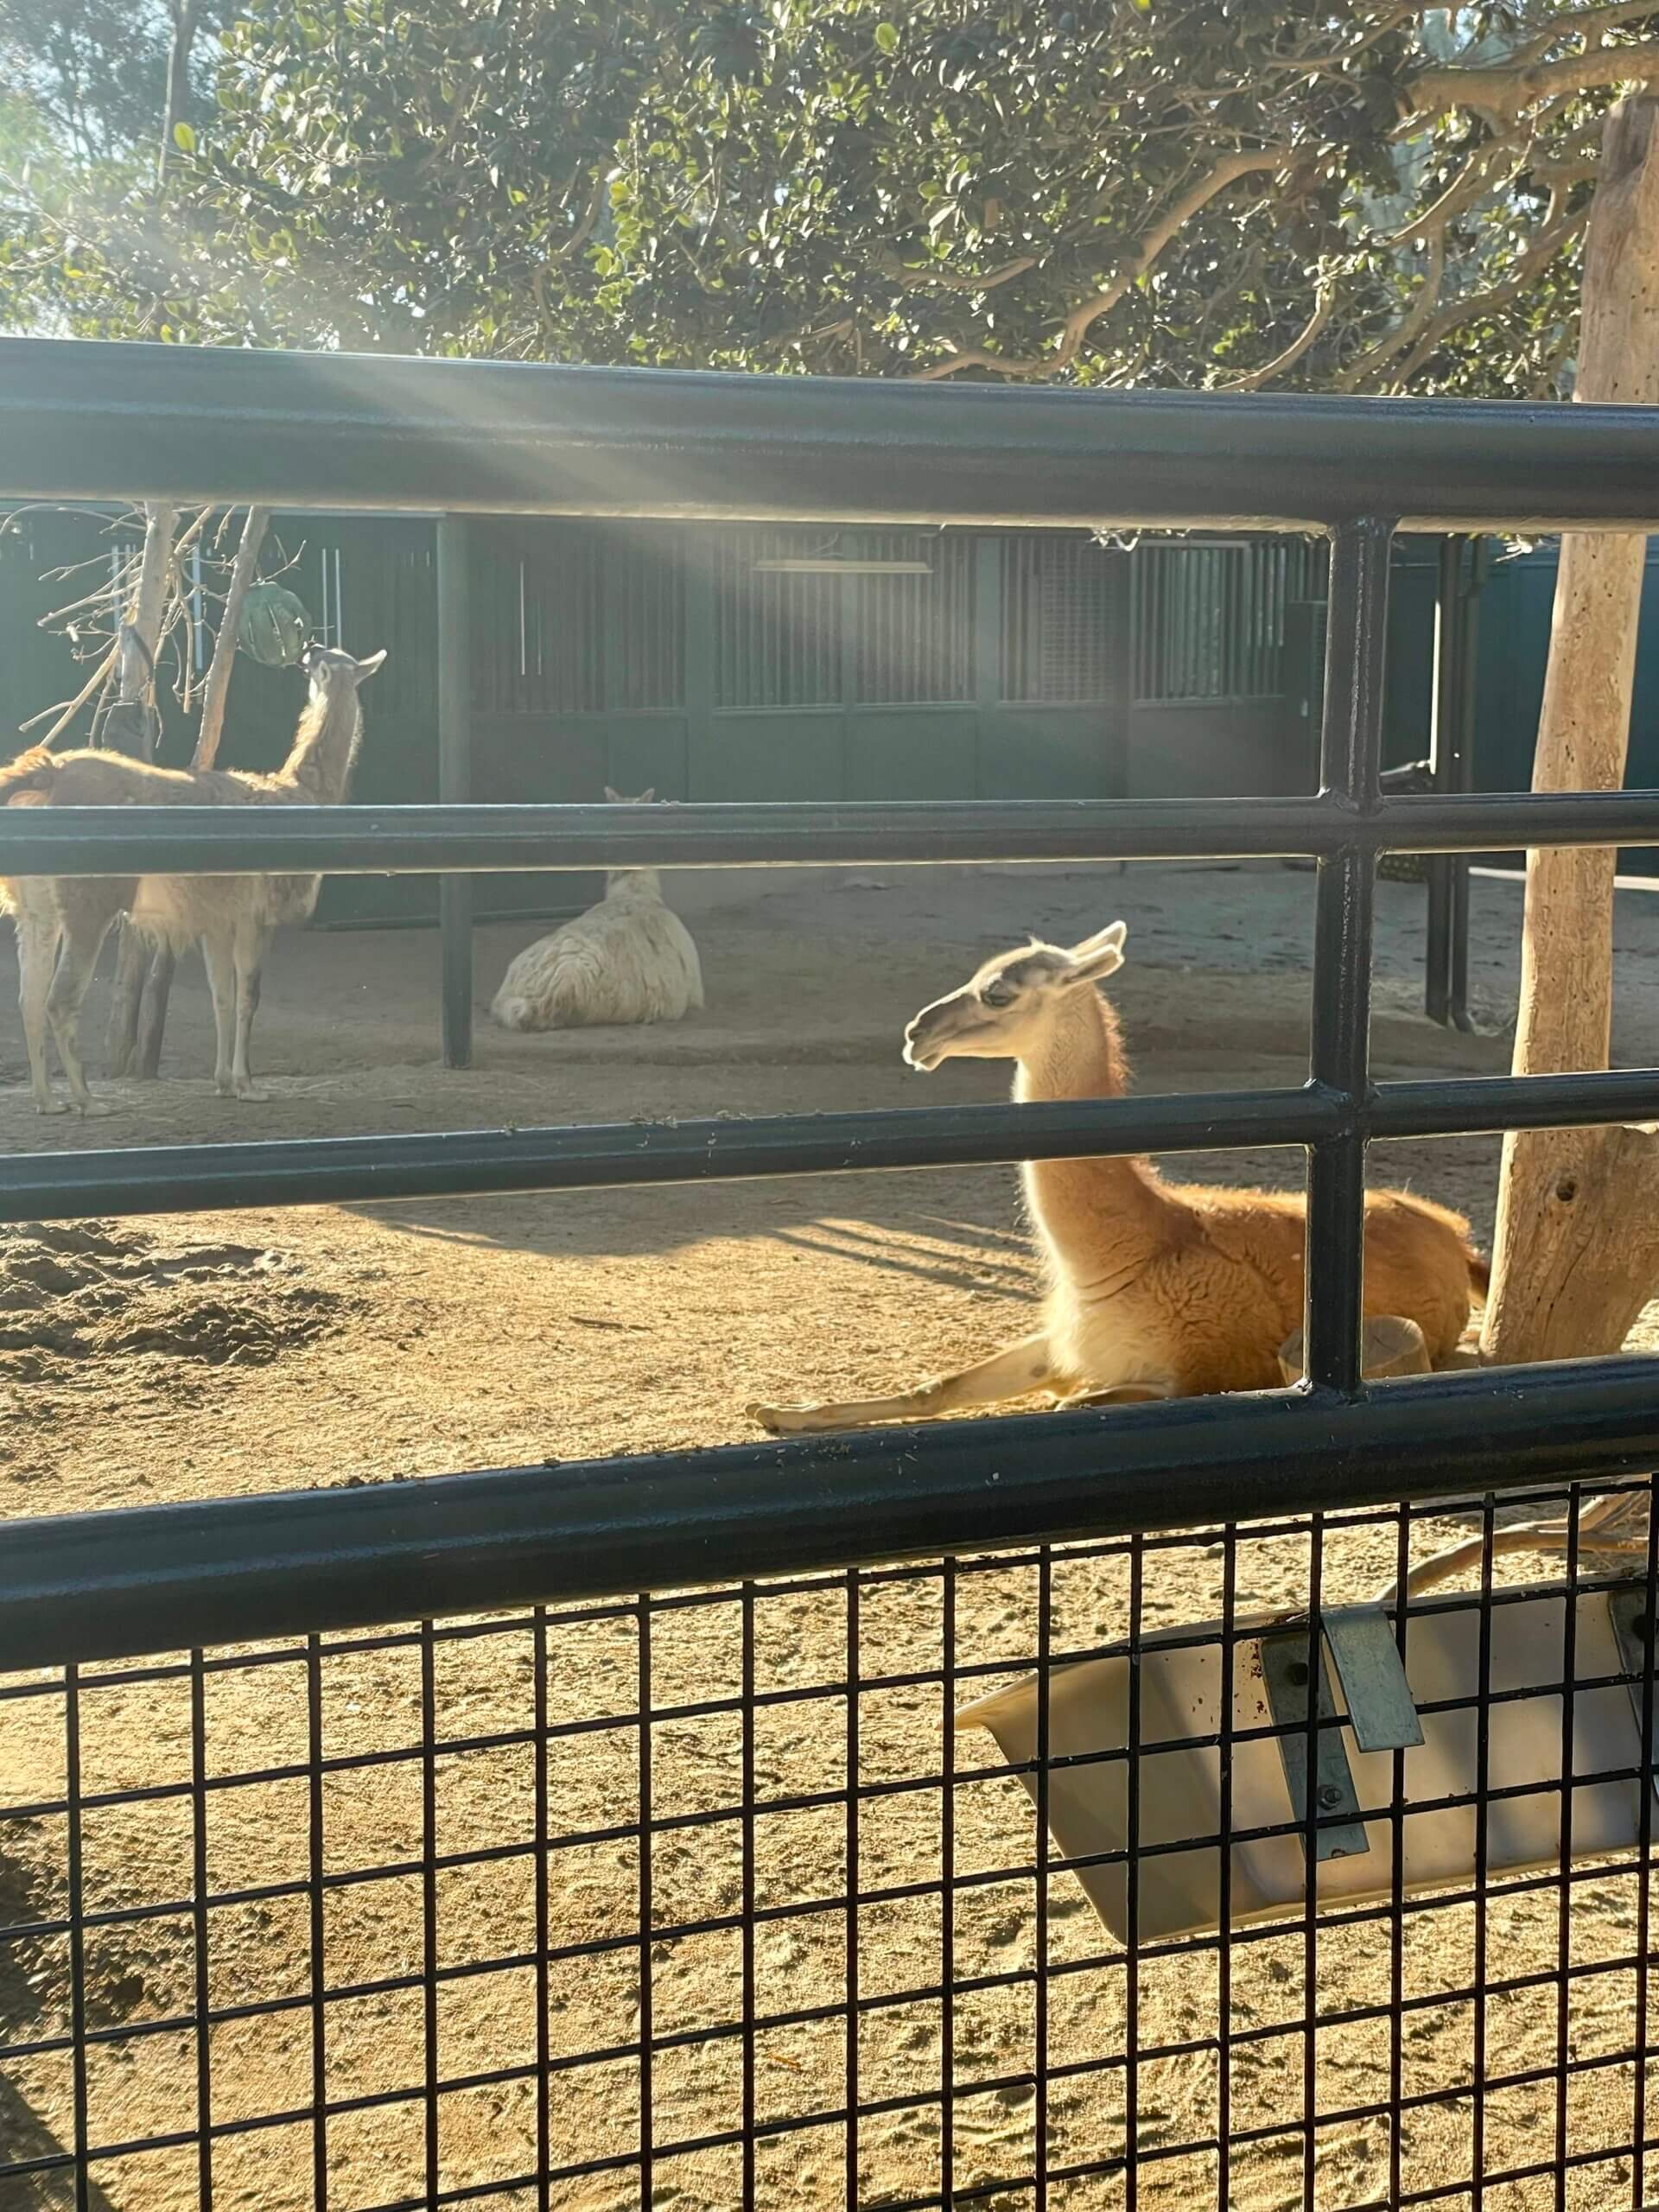 llama, zoo animals, San Diego Zoo, visiting the san diego zoo, are zoos ethical?, are zoos as bad as seaworld?, are zoos okay?, are zoos bad?, mixed feelings on zoos, animals in captivity, San Diego, things to do in san diego, tourist attractions in san diego